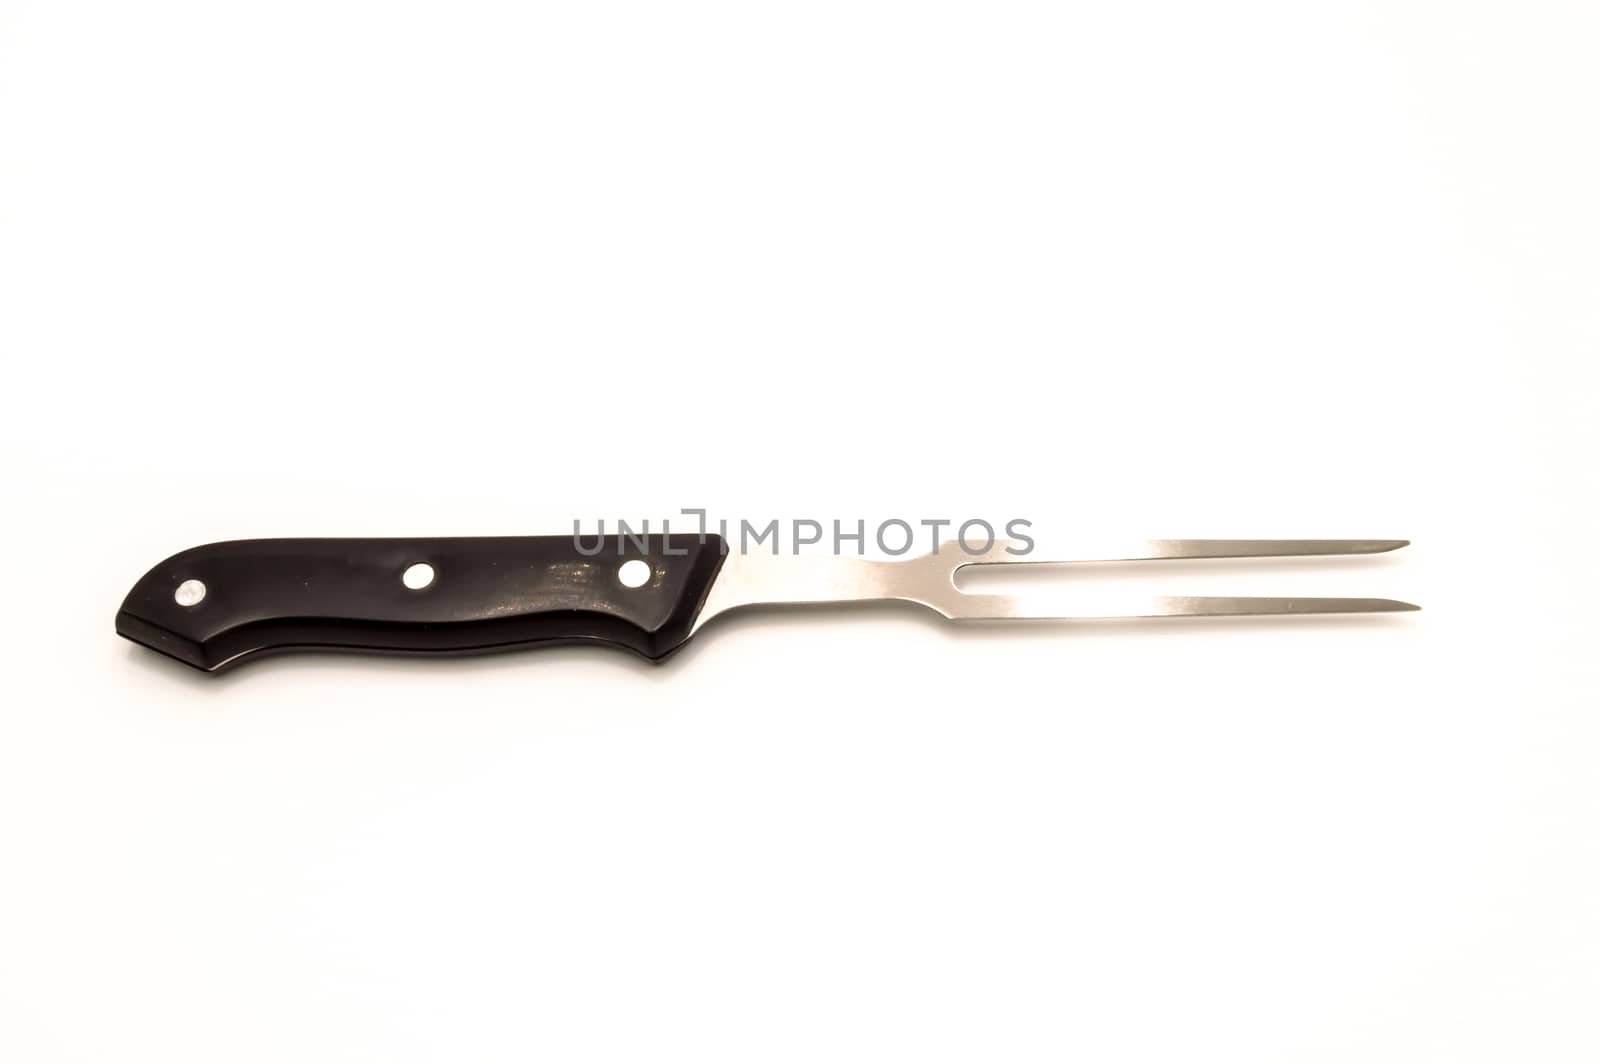 Meat fork with a black wooden handle by Philou1000